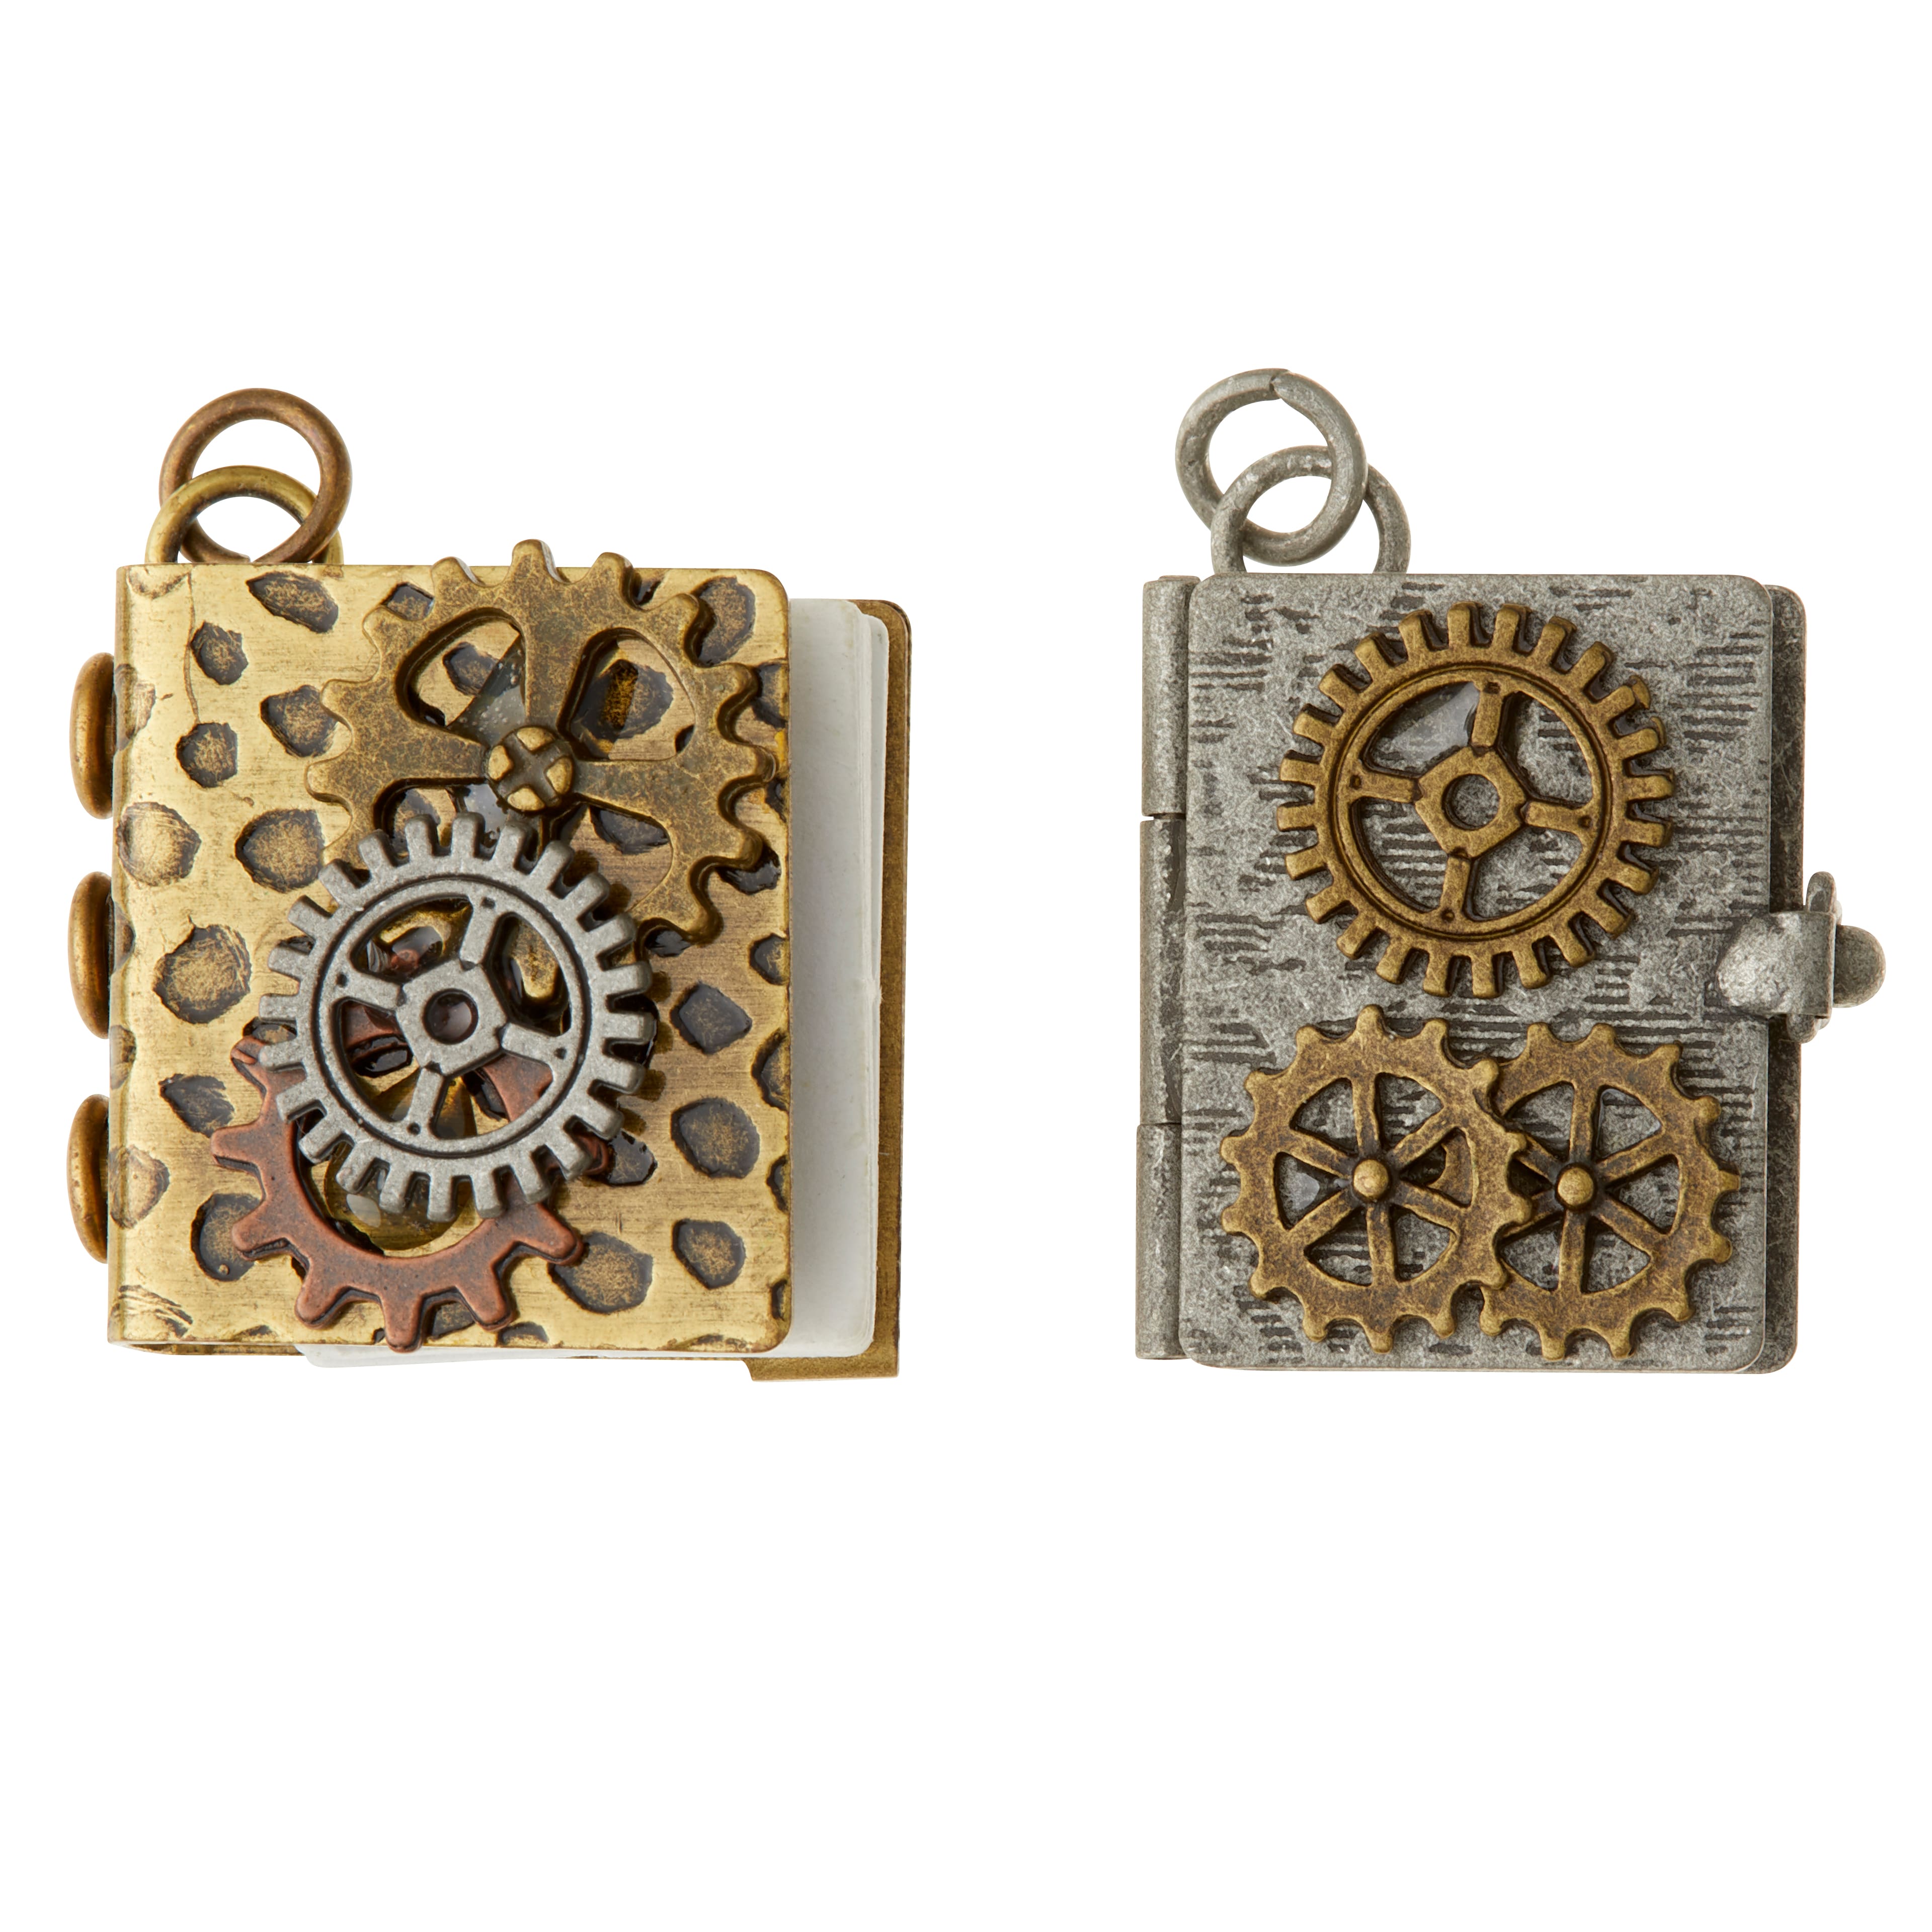 Buy the Found Objects™ Oxidized Brass Book Charms By Bead Landing™ at  Michaels